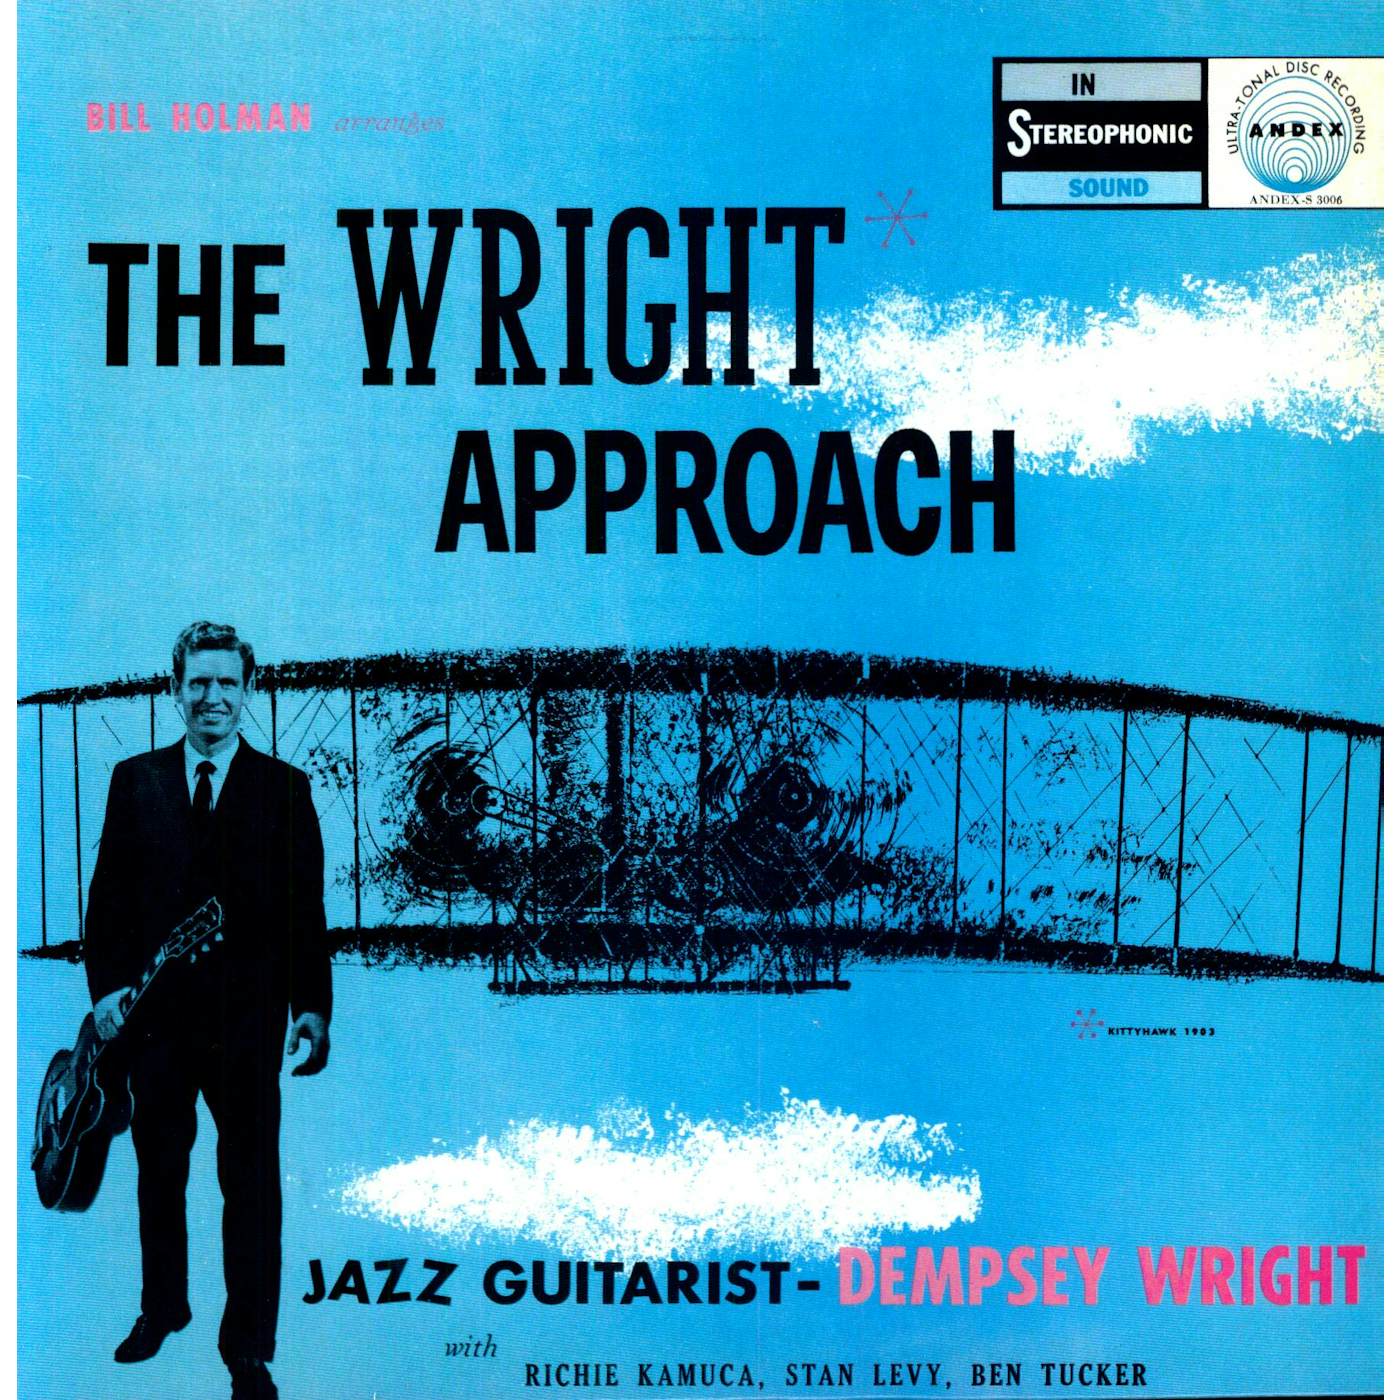 Dempsey Wright Wright Approach Vinyl Record